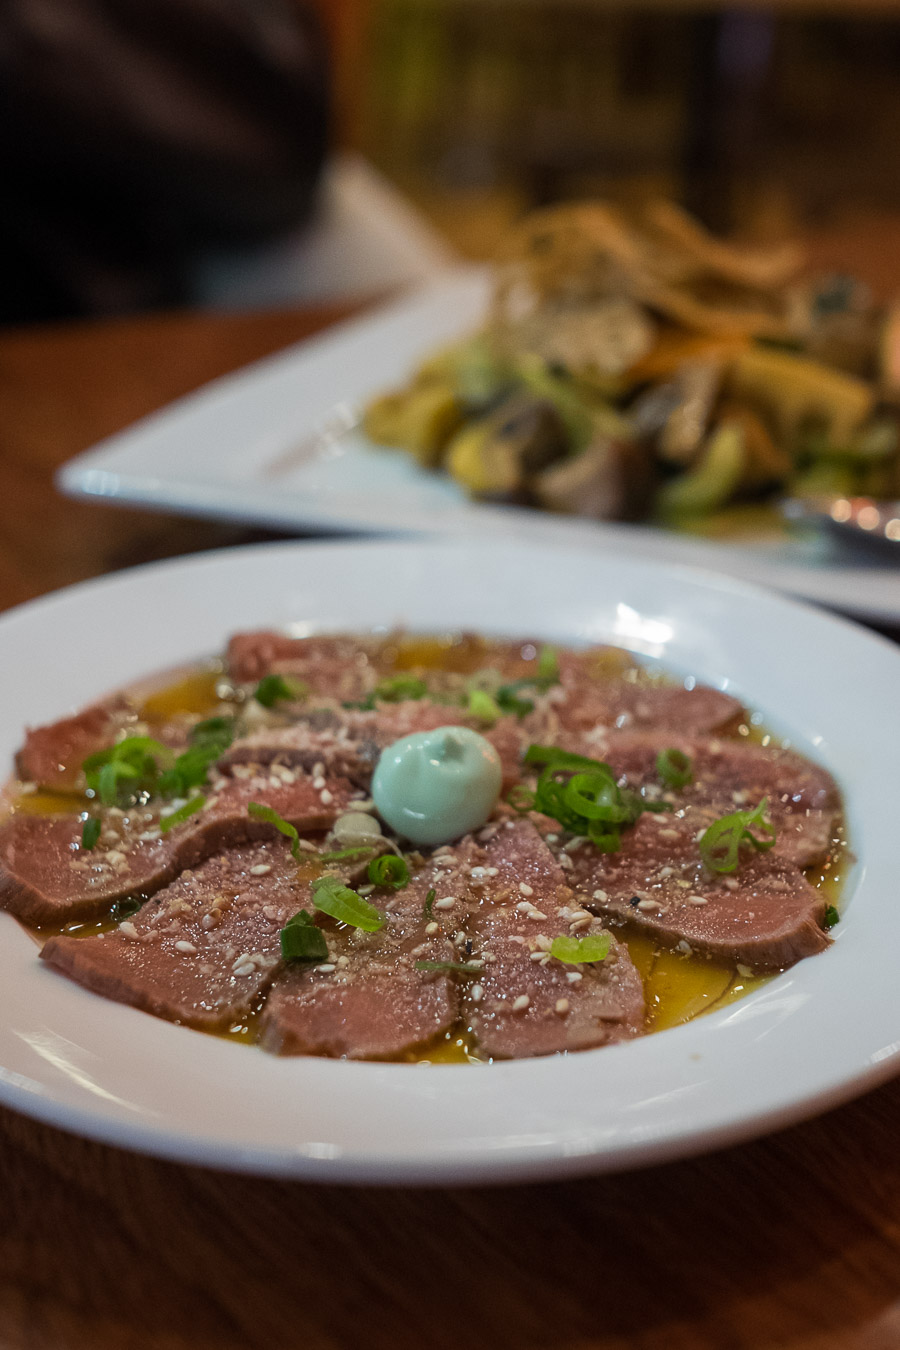 Beef tataki (AU$9.50) - lightly seared Australian beef, thinly sliced and served with soy and citrus sauce.